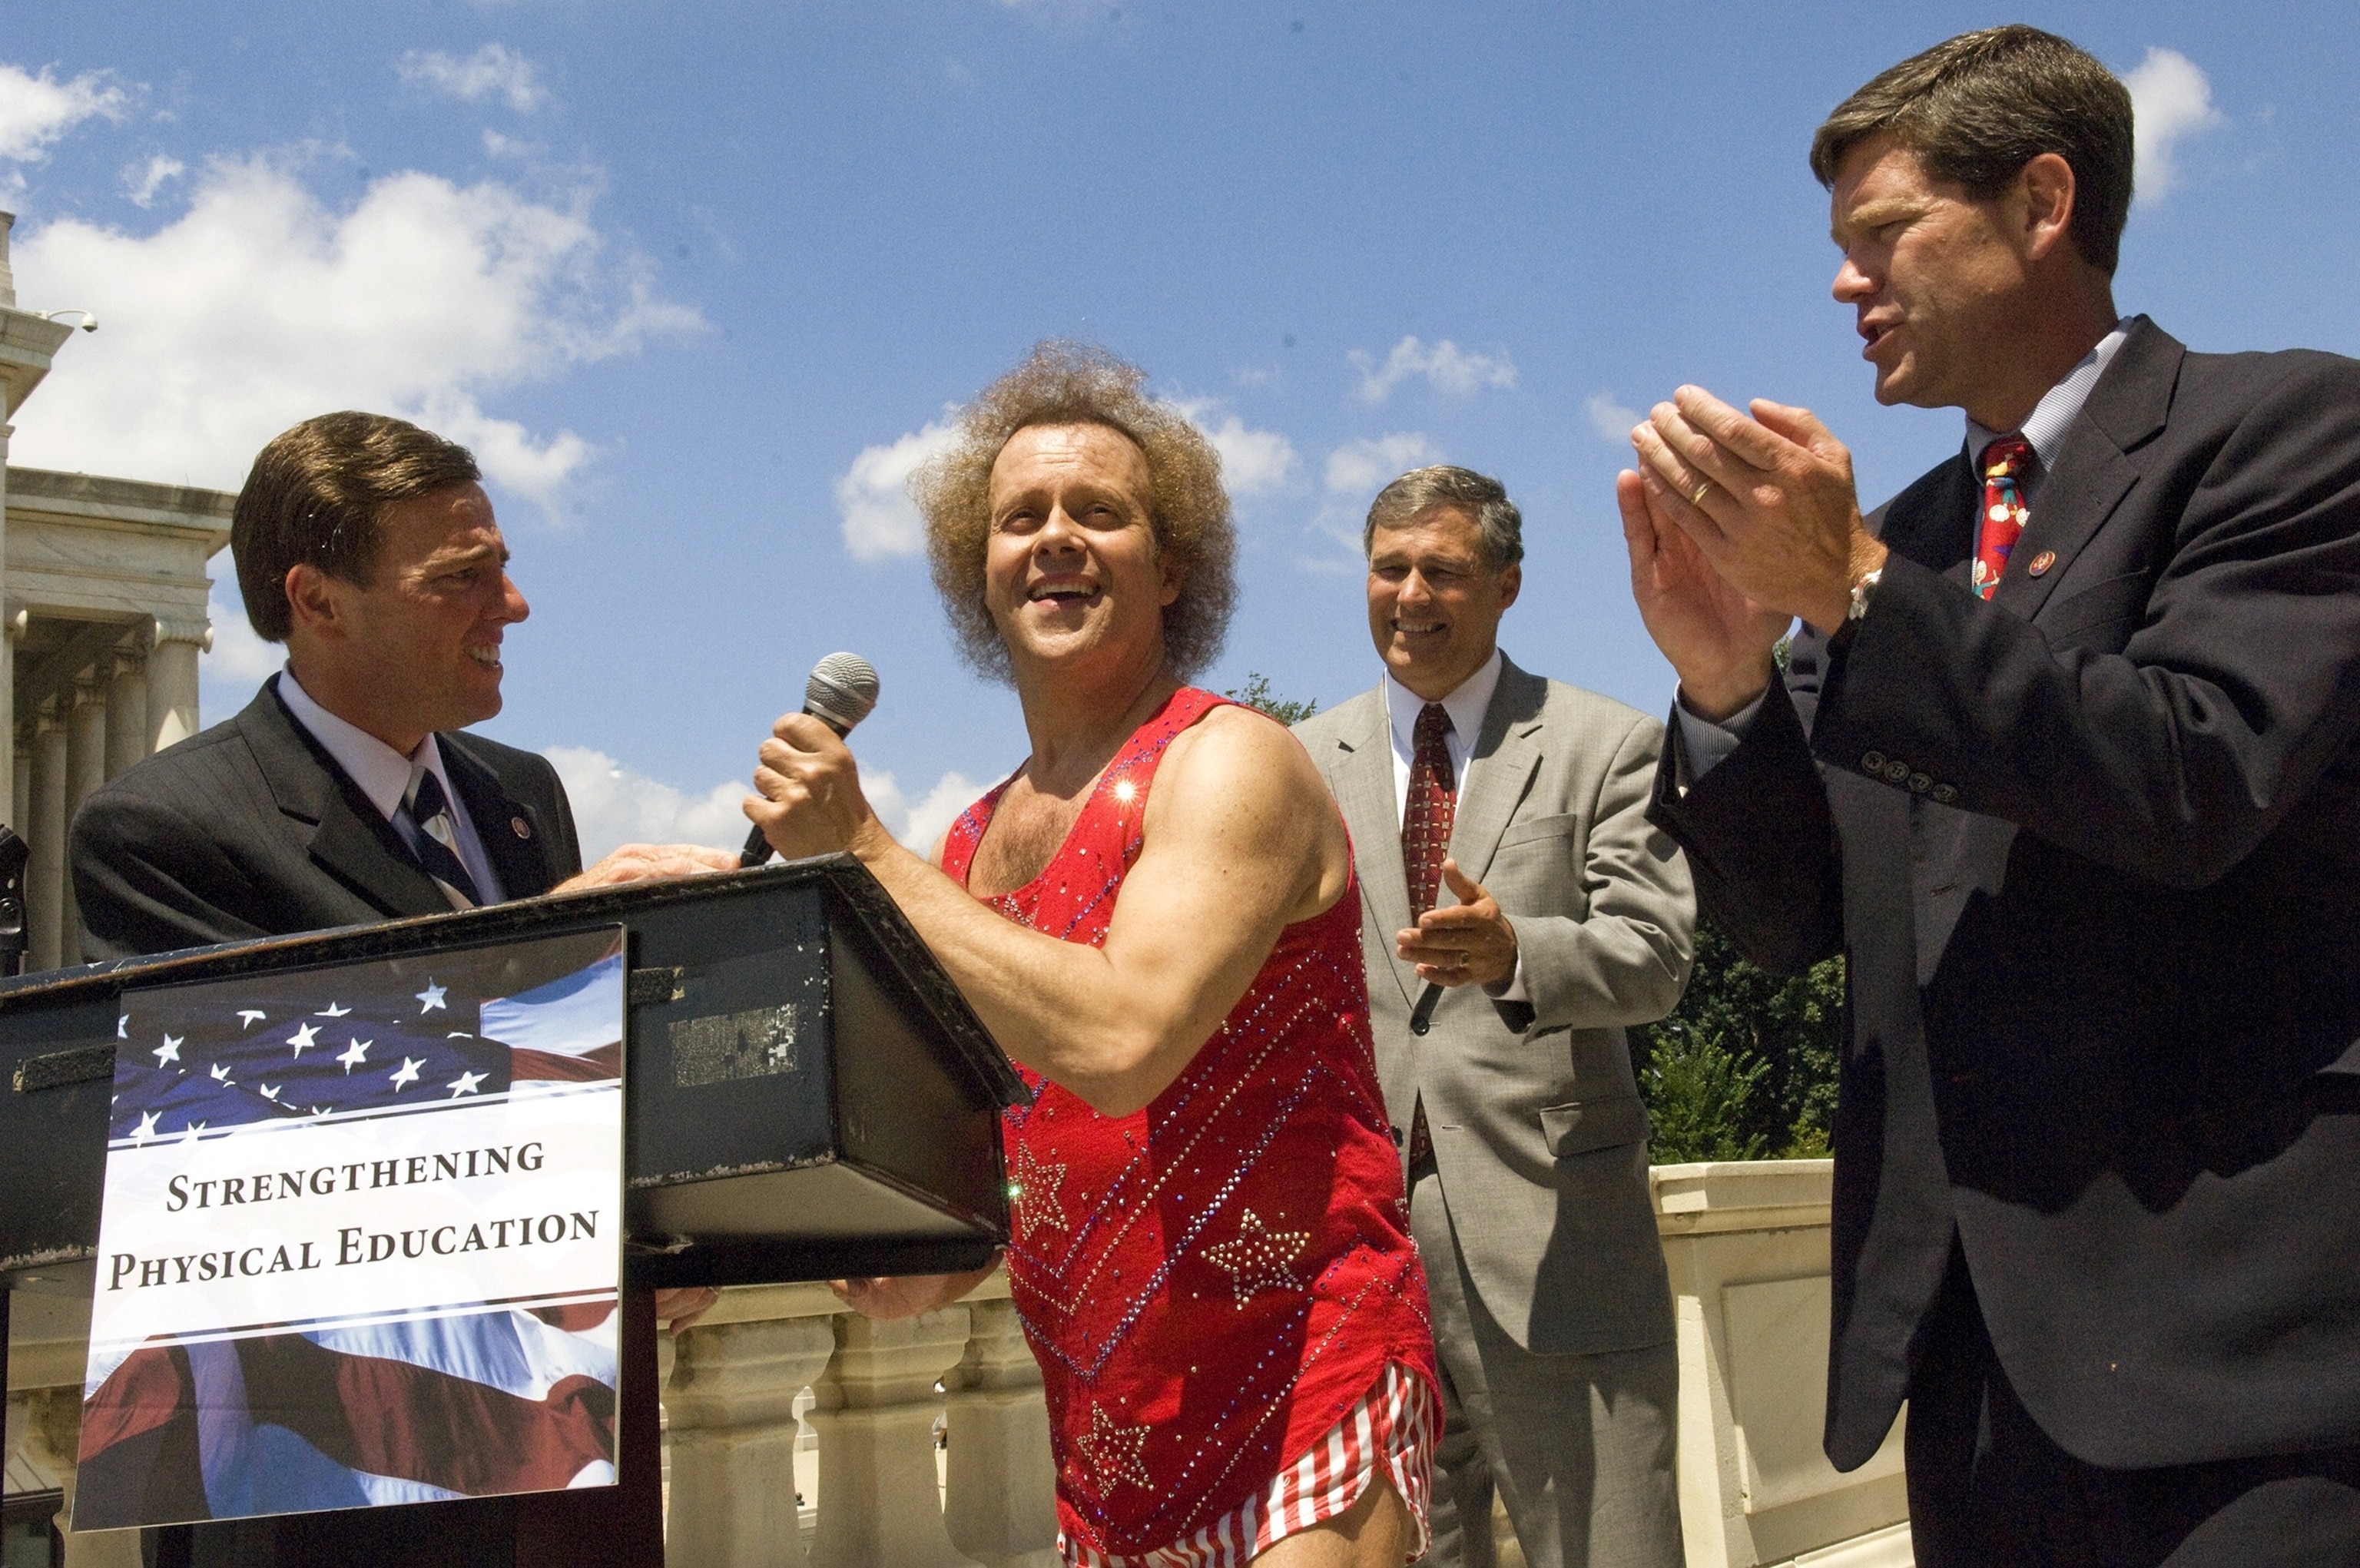 PHOTO: Fitness advocate Richard Simmons takes the microphone during a rally at the U.S. Capitol, on July 24, 2008, in Washington, D.C.